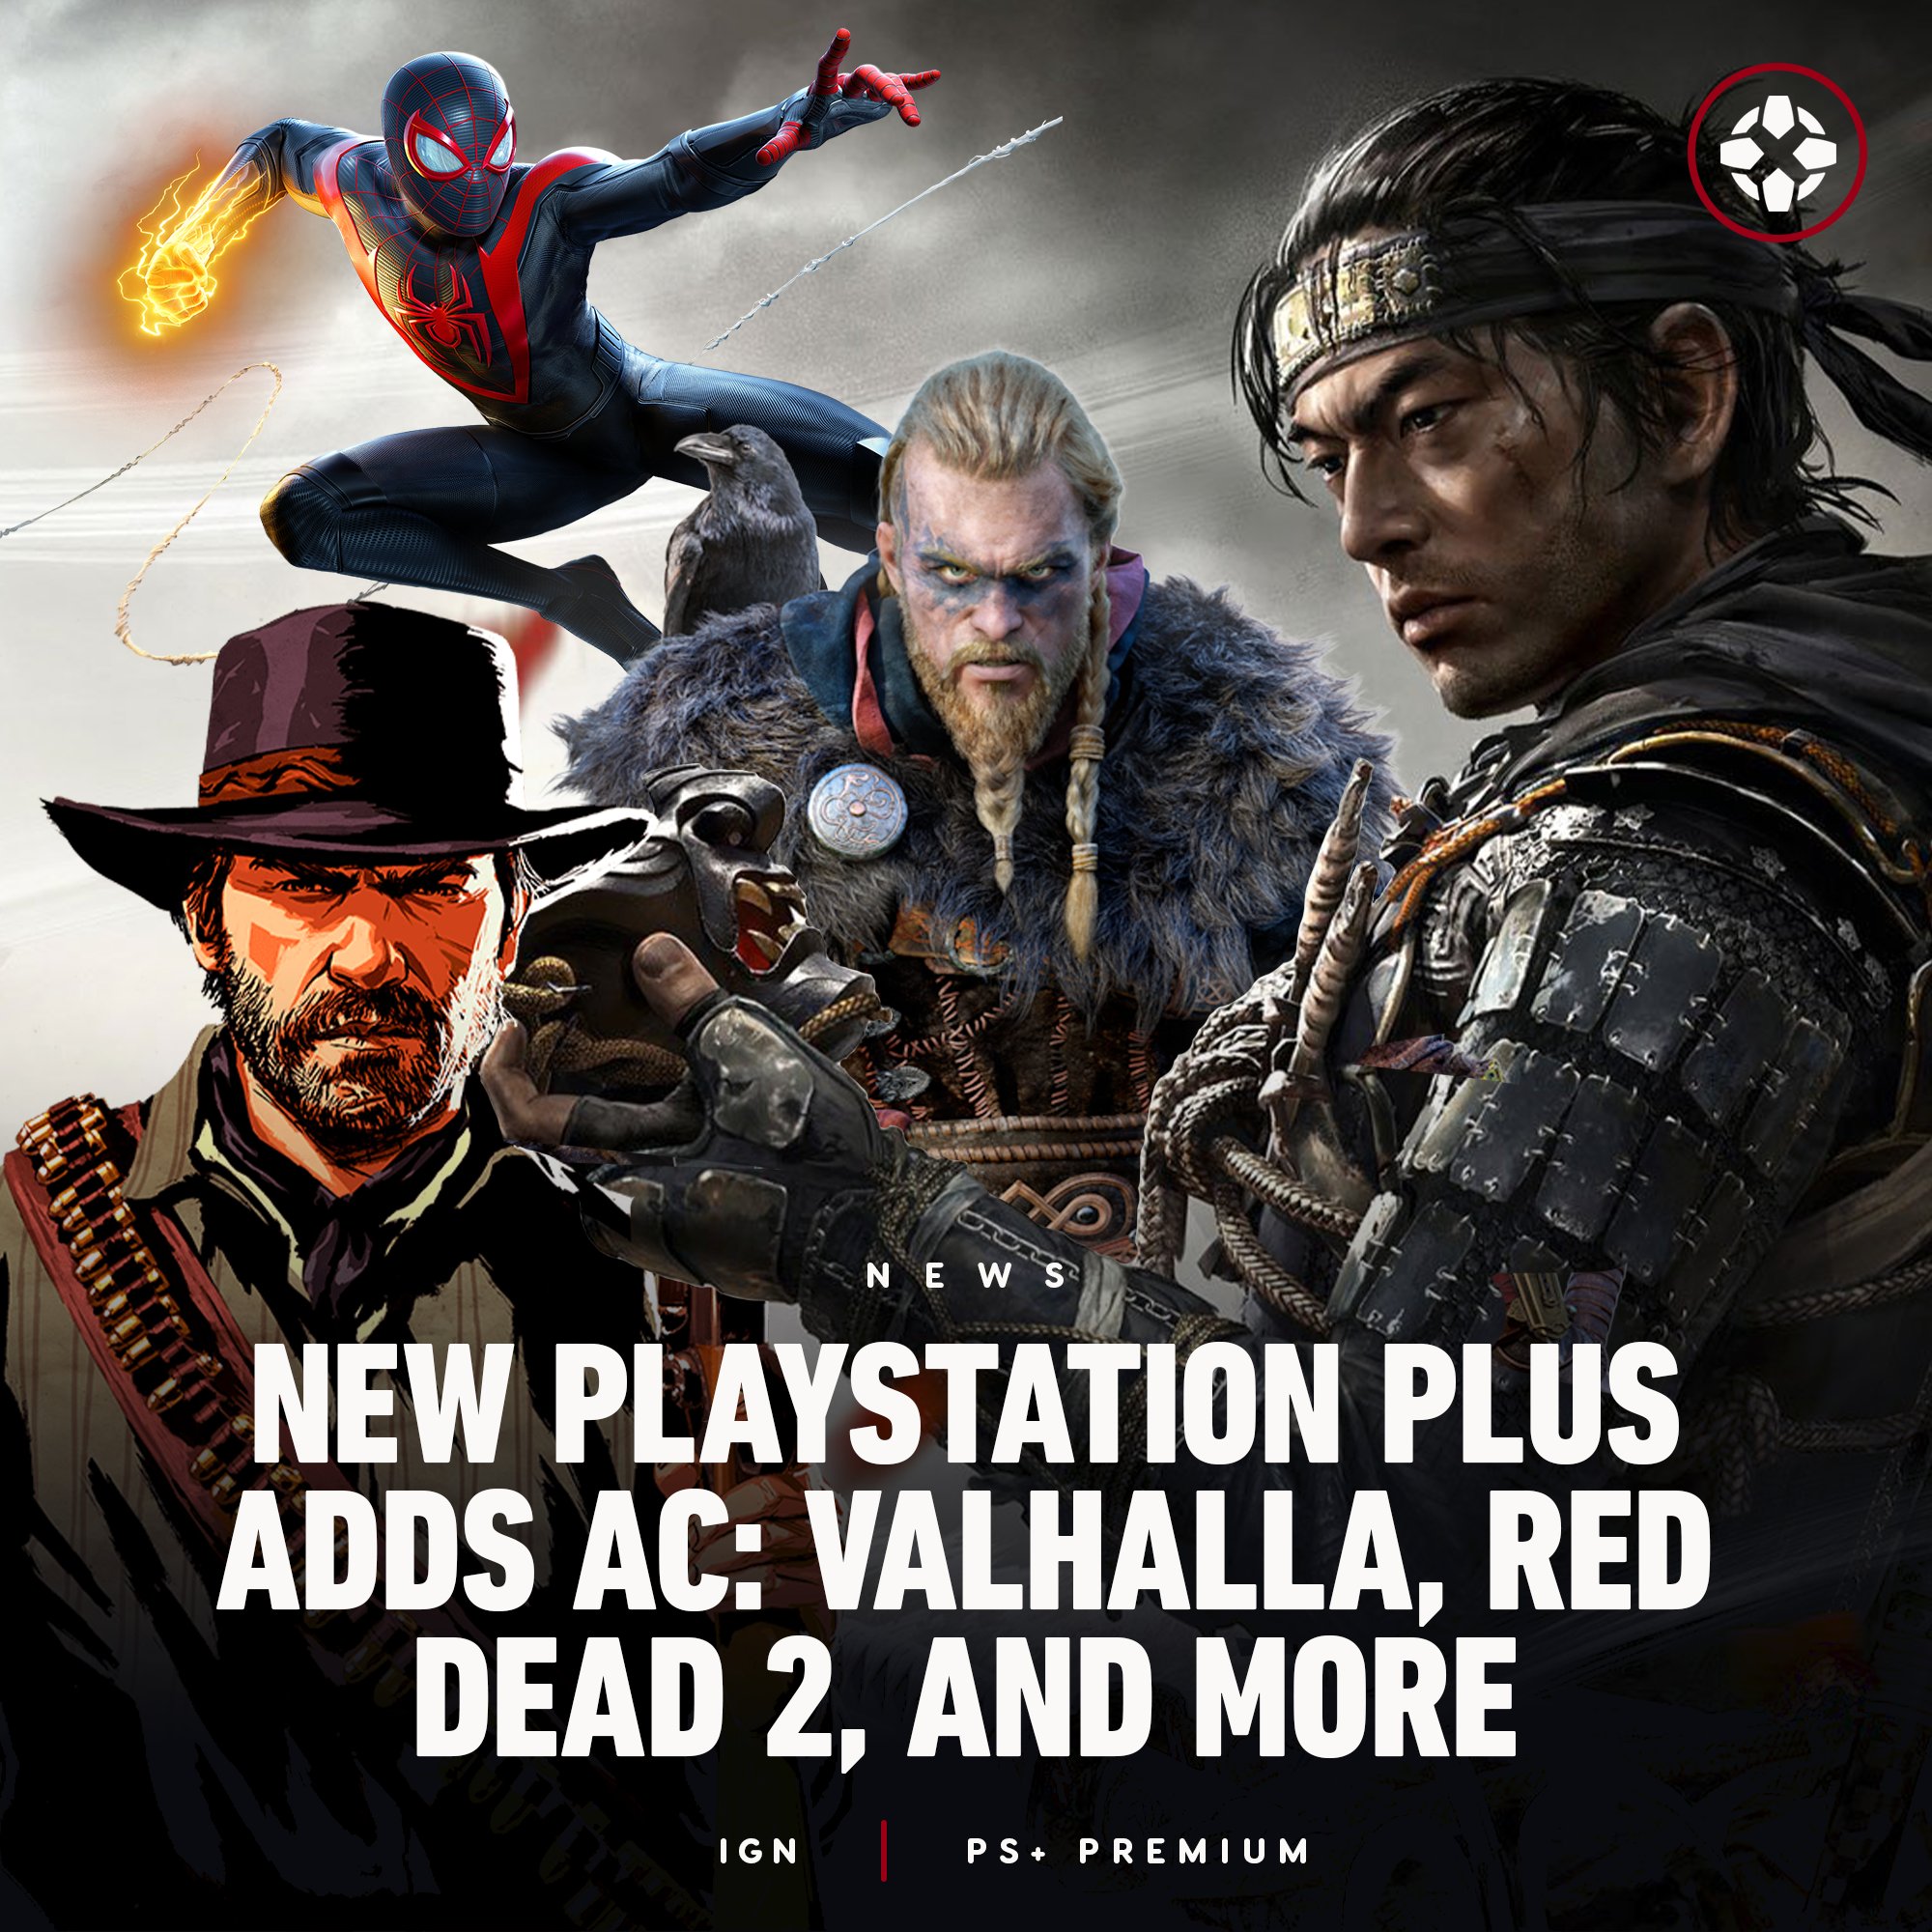 gennemførlig Bonde Ynkelig IGN on Twitter: "Sony has confirmed 56 PS4/PS5 titles for the Extra and  Premium PlayStation Plus service, including Red Dead Redemption 2 and  Assassin's Creed: Valhalla as well as a host of